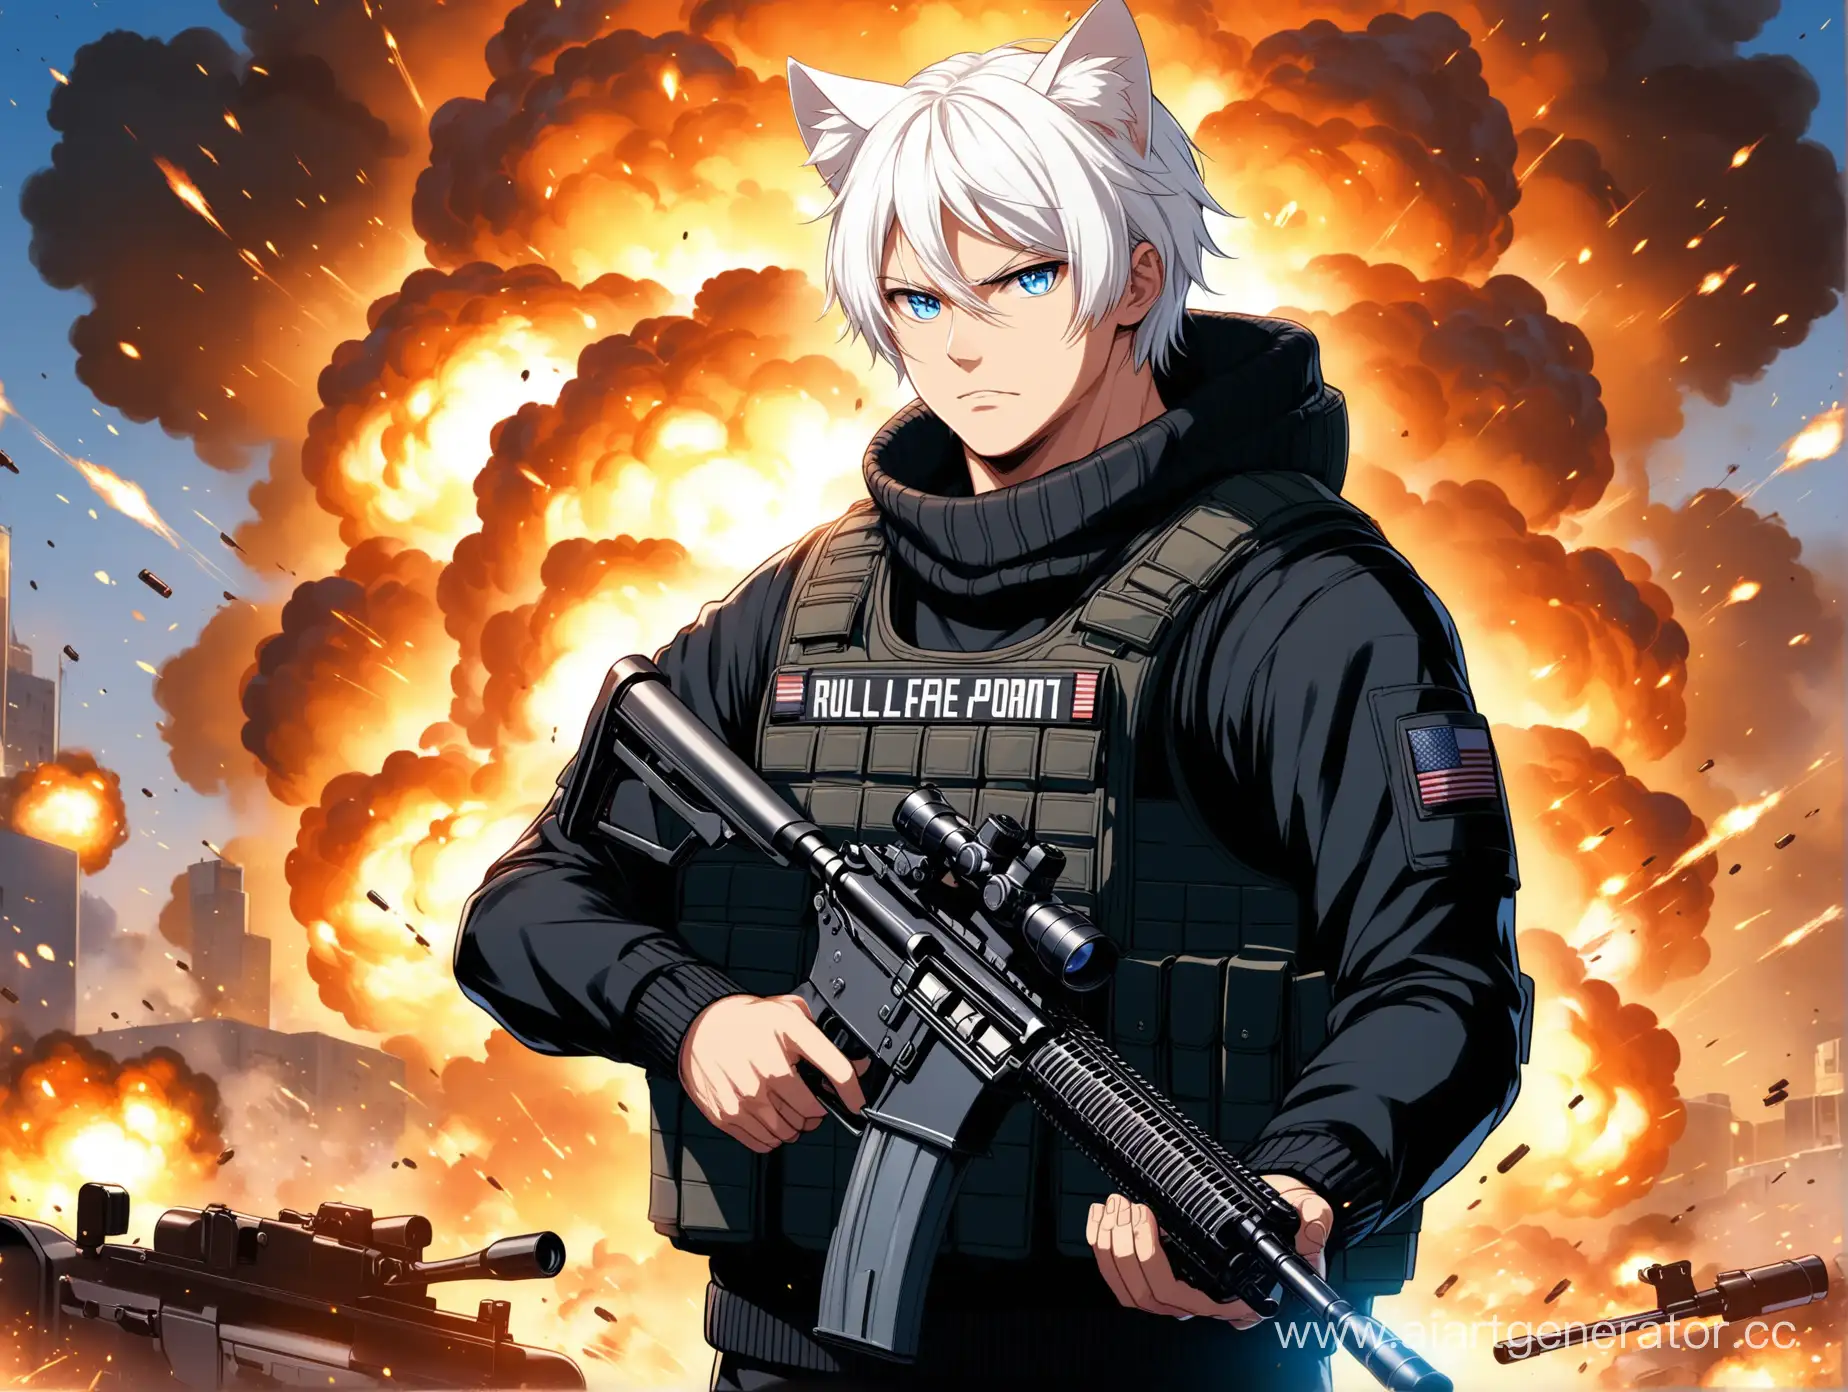 Silverhaired-Man-in-Cat-Ears-with-Rifle-and-Bulletproof-Vest-against-Explosive-Background